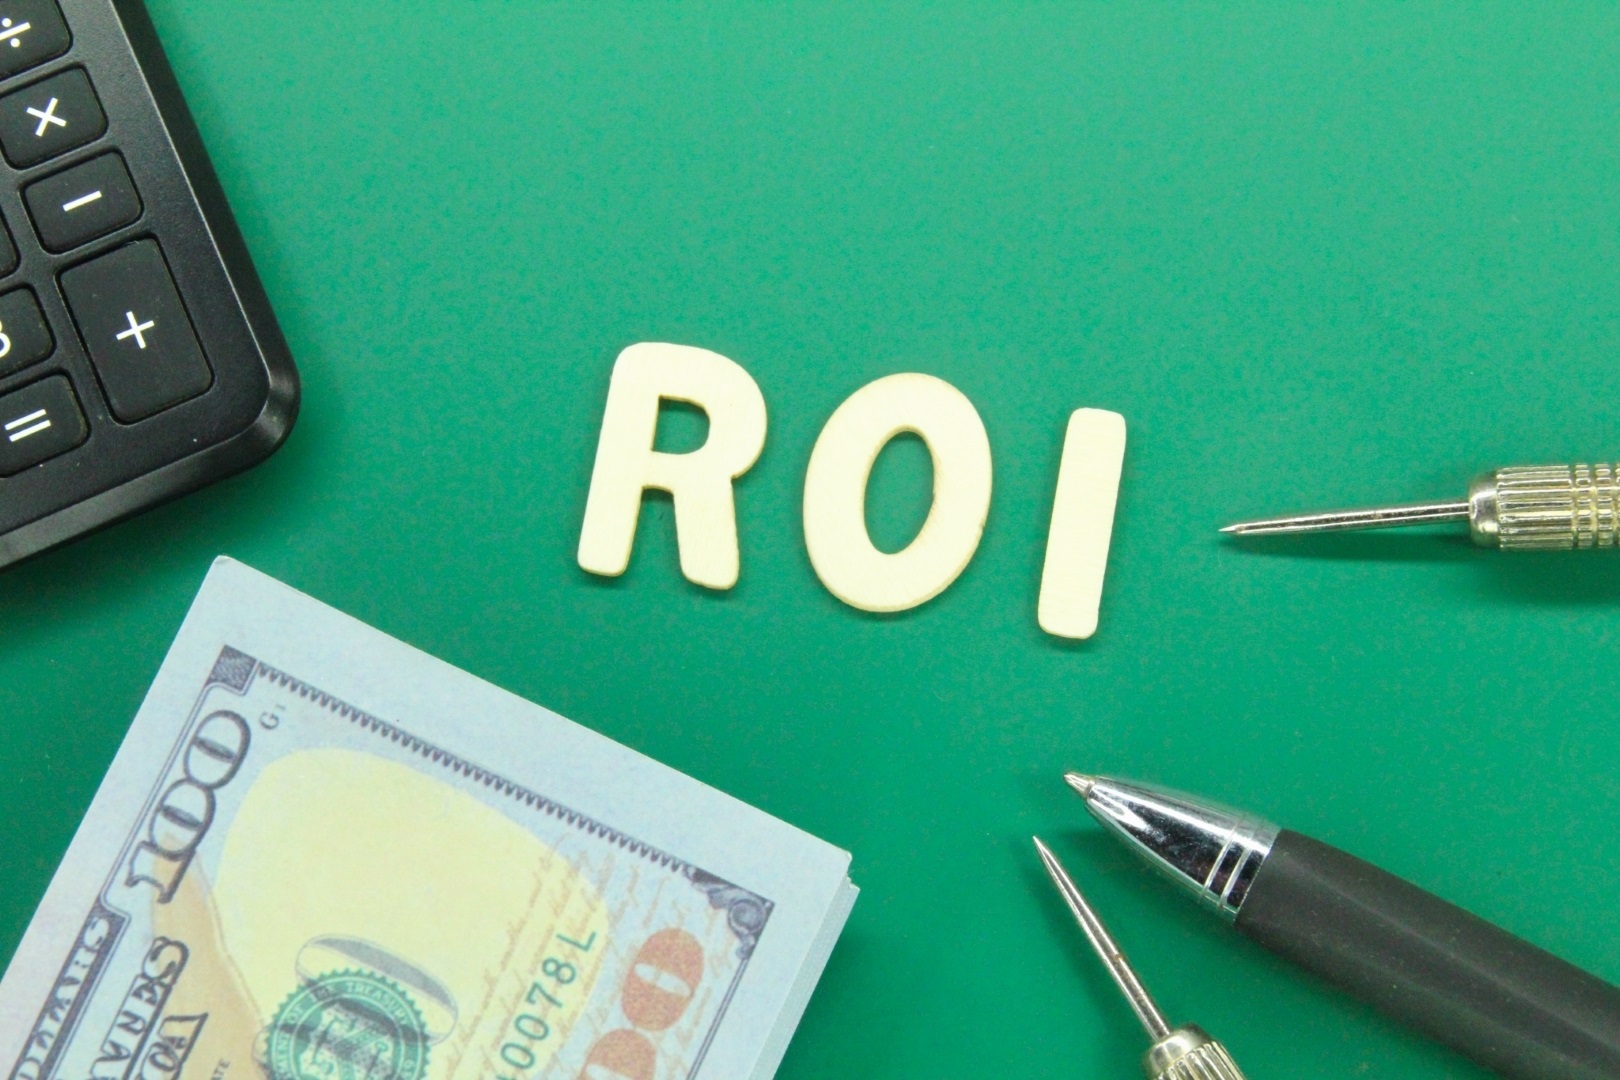 ROI in Digital Marketing: How to Measure It